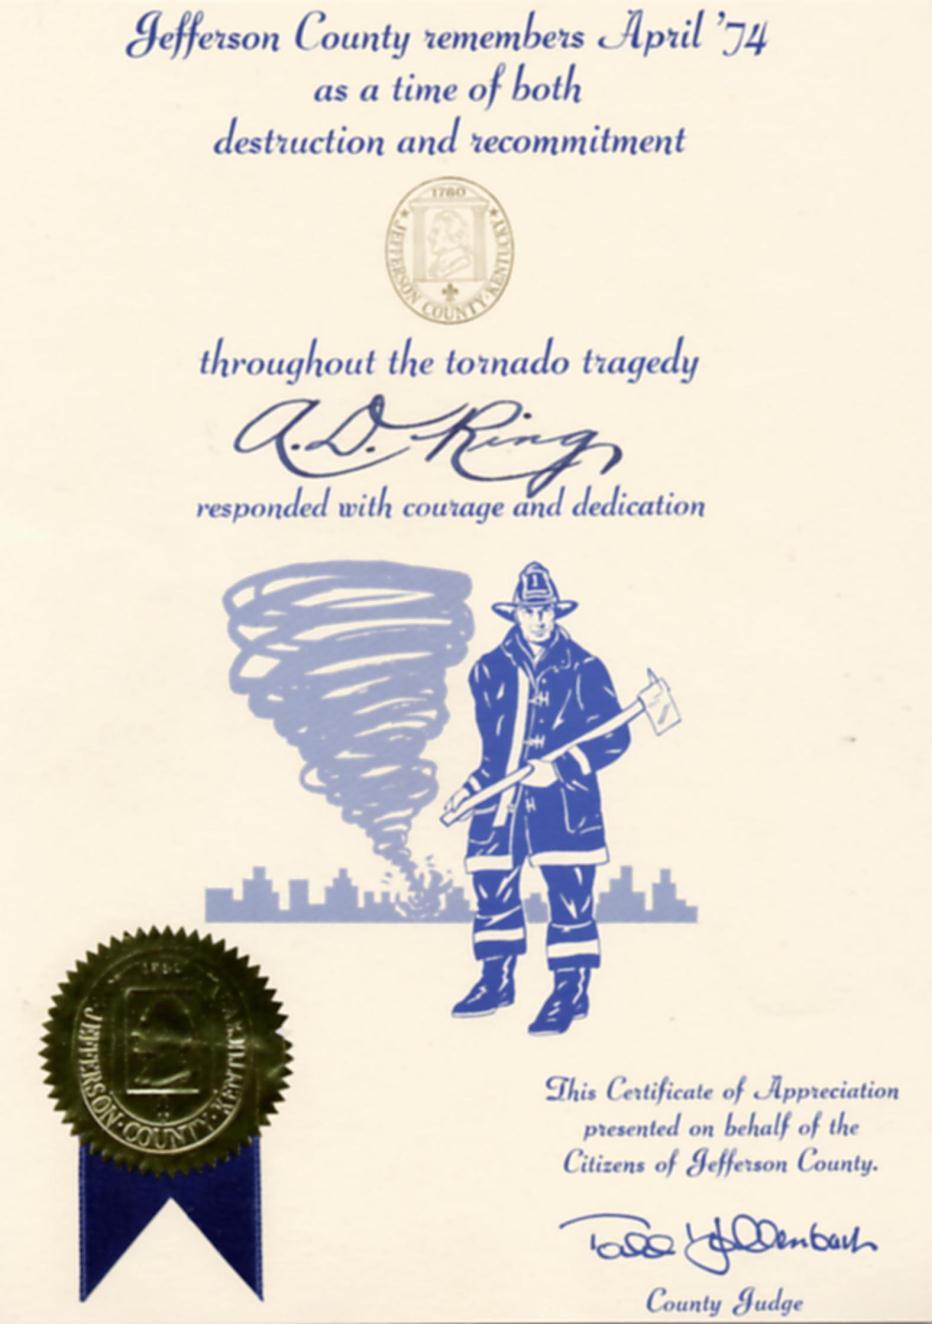 April, 1974 Each firefighter that participated in the Tornado Operation